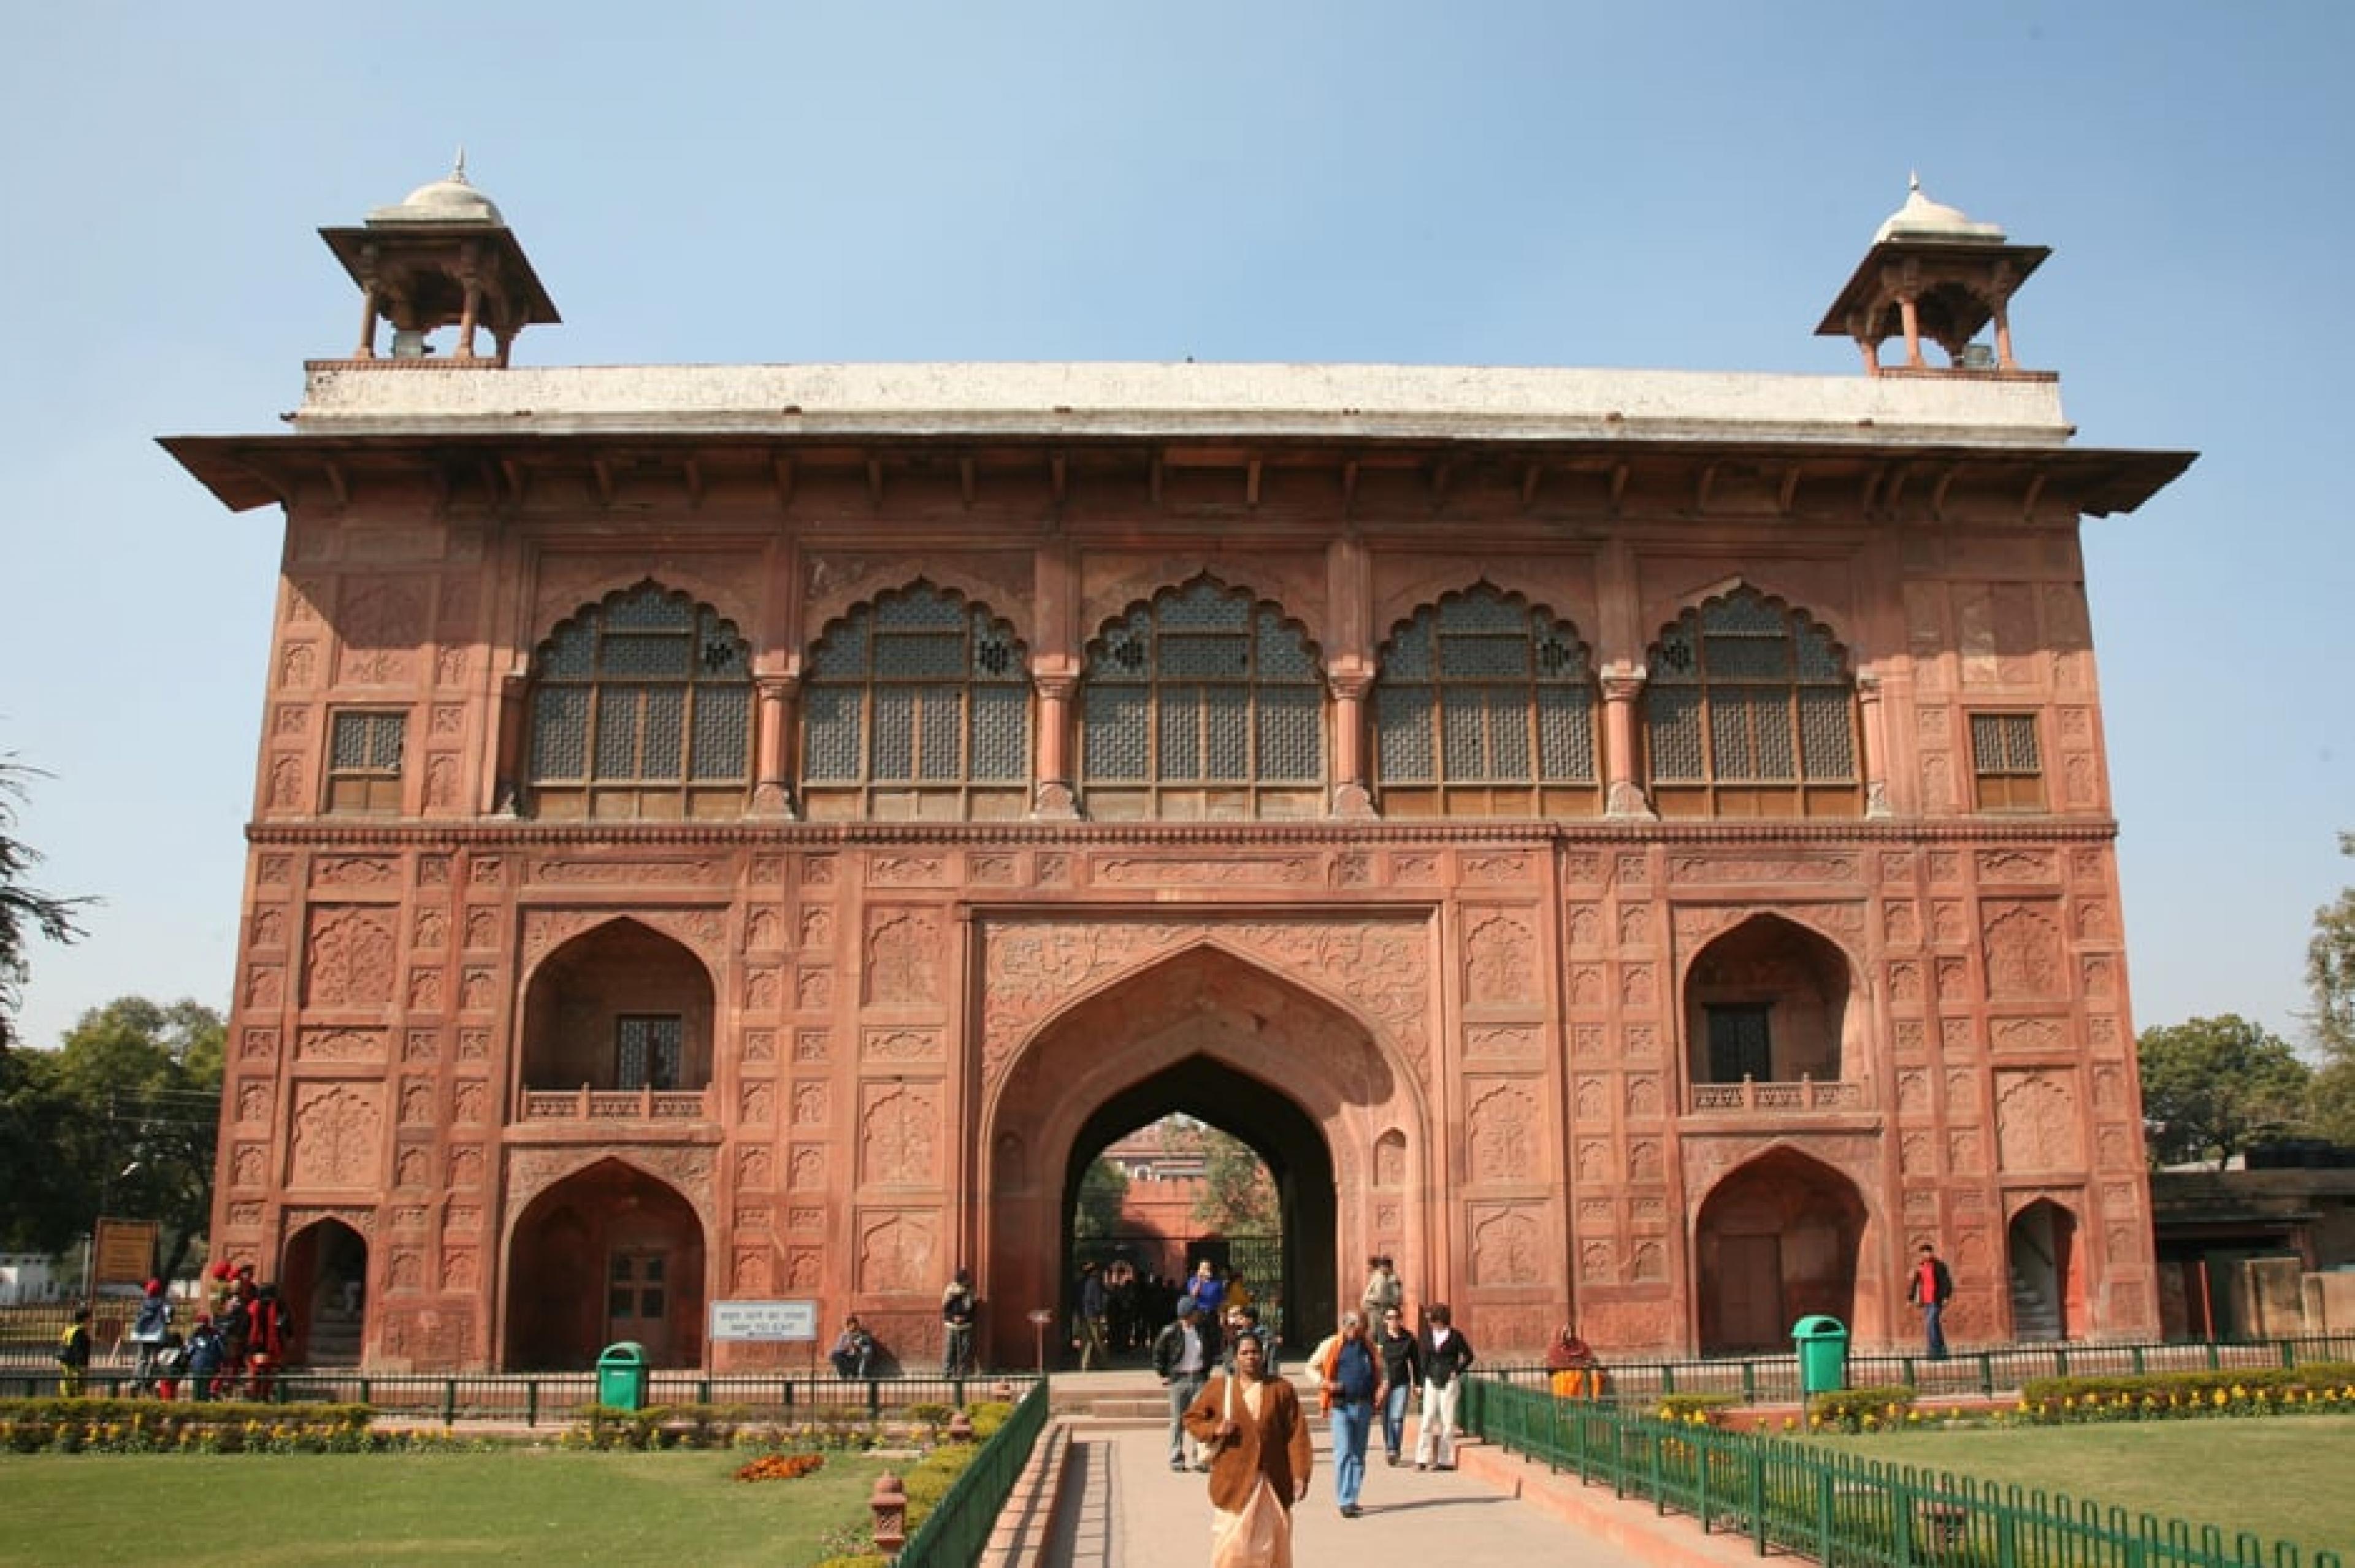 Fort at Red Fort, Delhi, India - Courtesy Hans A. Rosbach